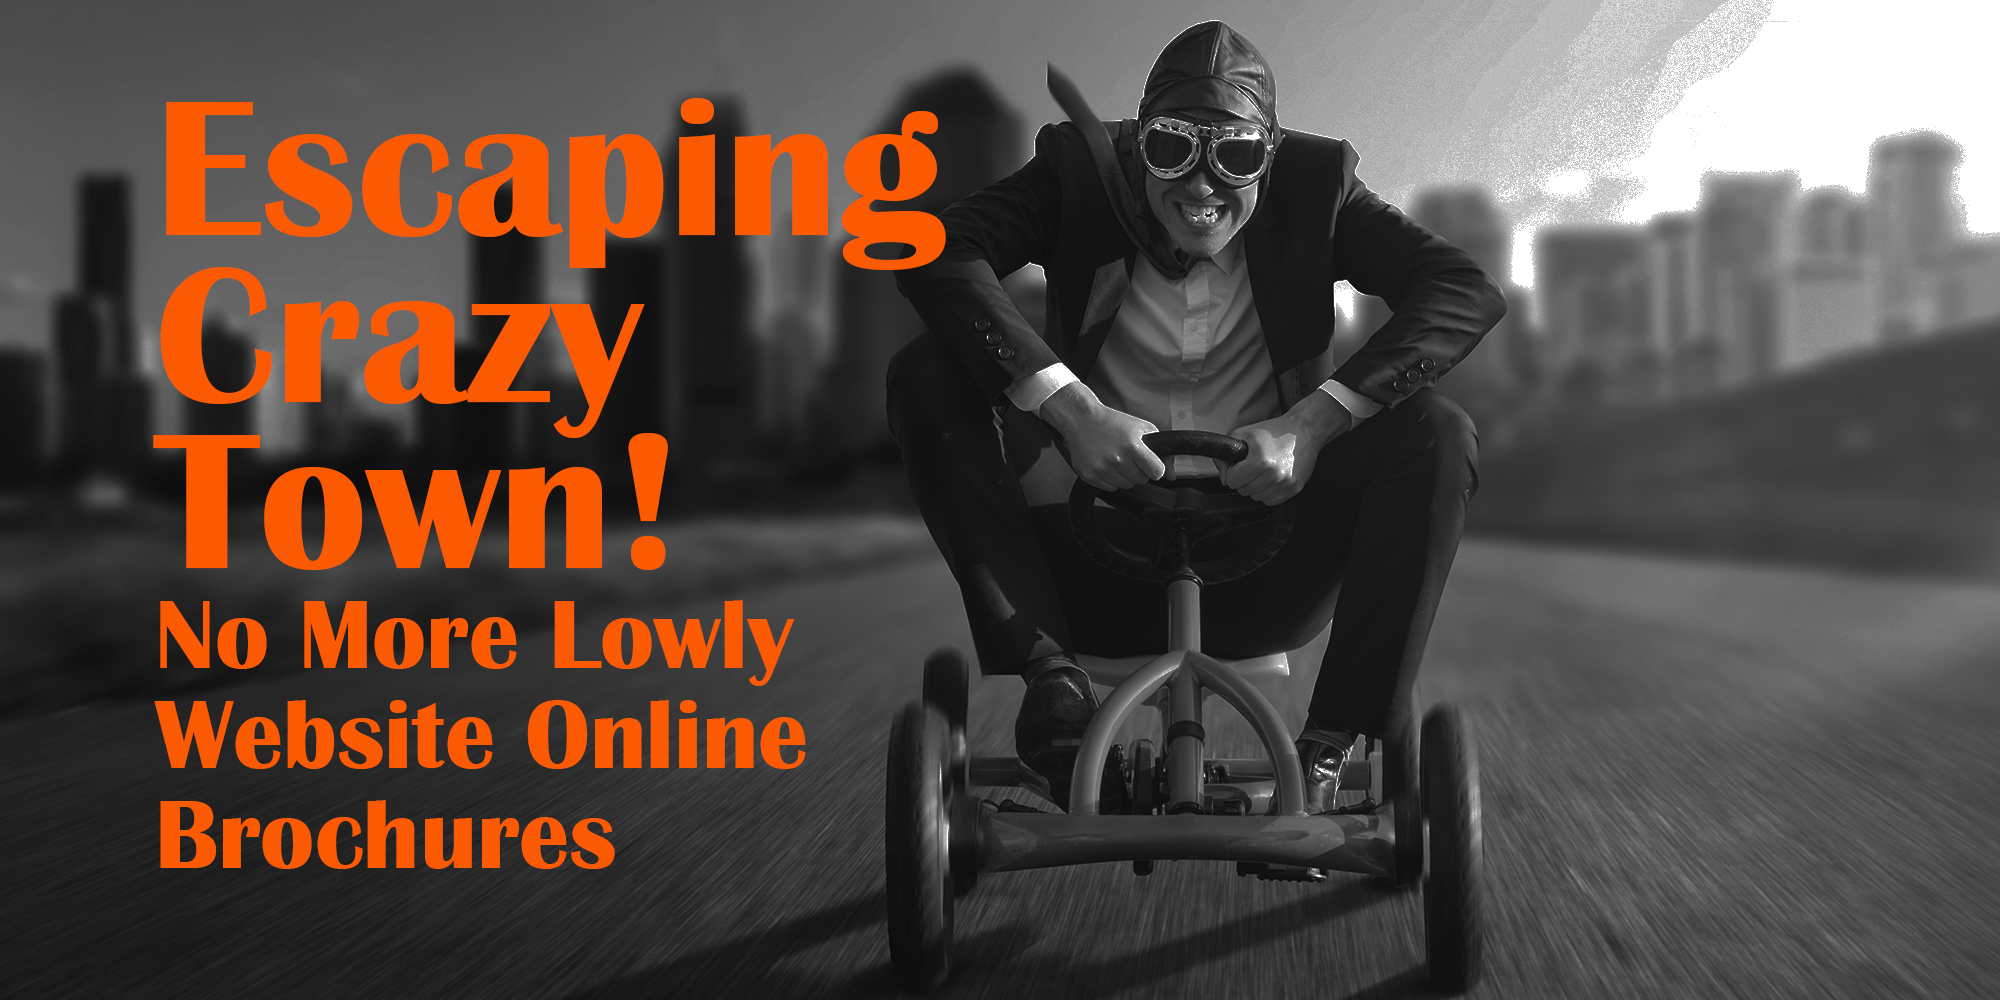 Escaping Crazy Town! Make Website More Than Online Brochure